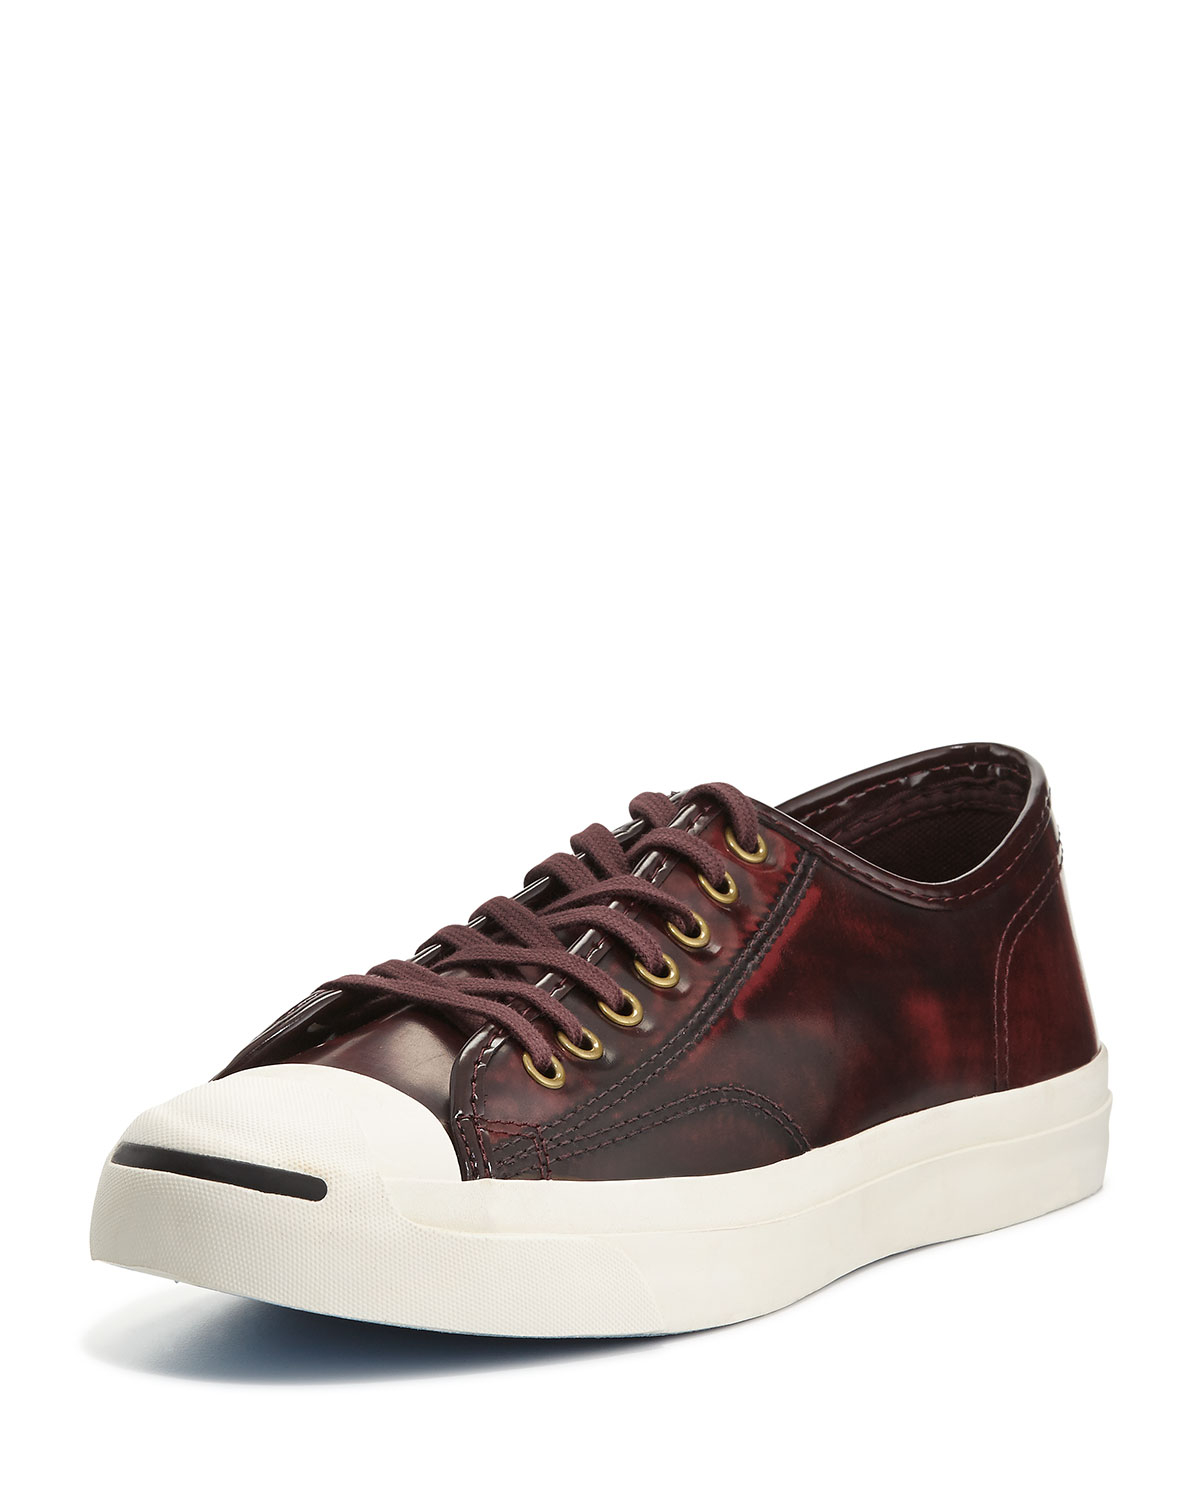 Lyst Converse Jack Purcell Marbled Leather Sneakers In Red For Men